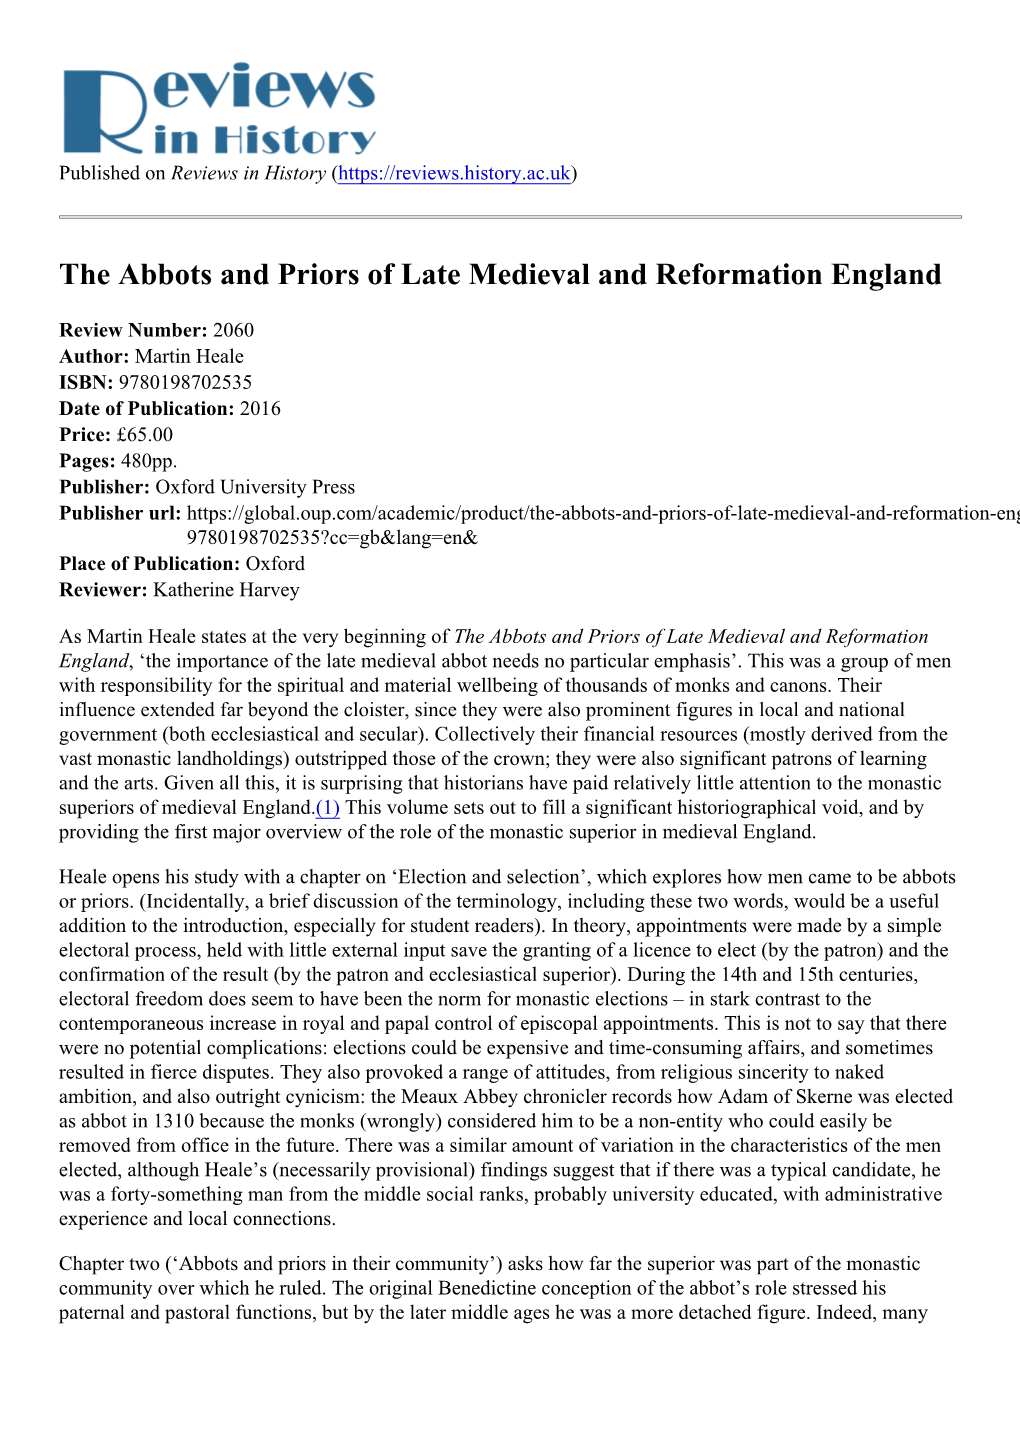 The Abbots and Priors of Late Medieval and Reformation England